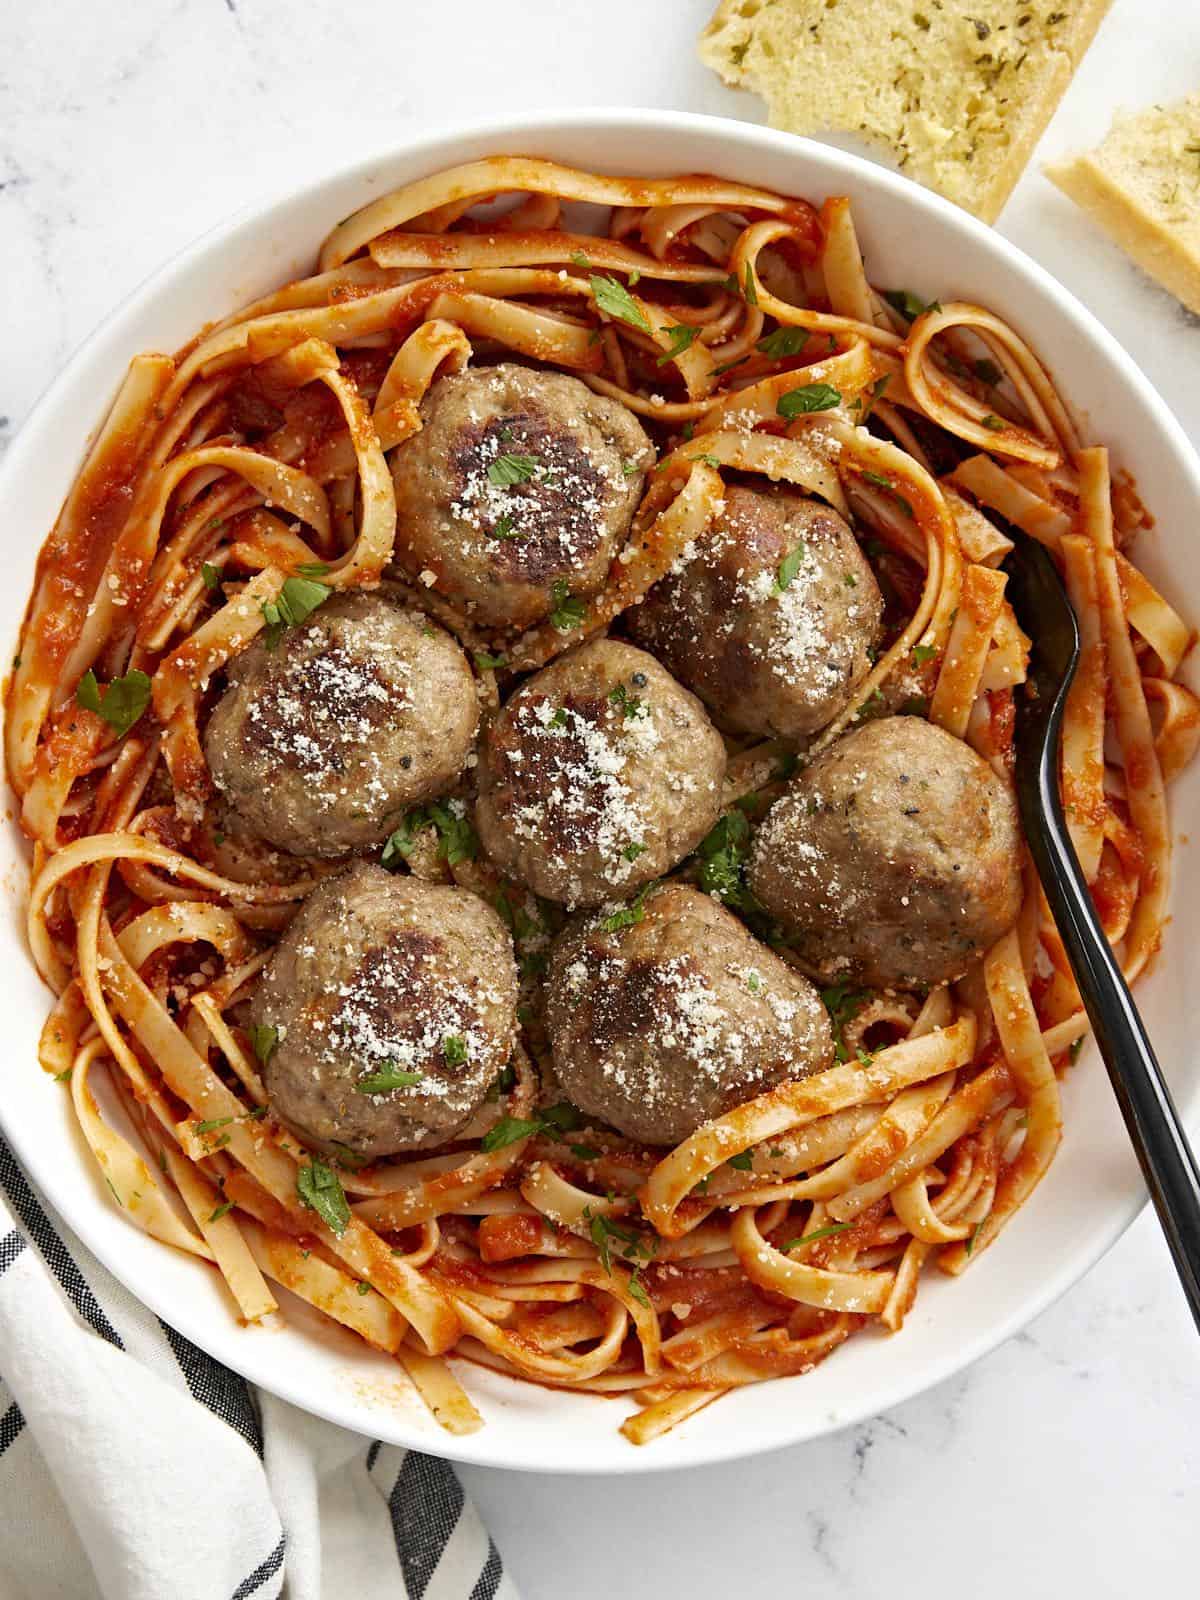 Overhead view of a plate full of spaghetti with turkey meatballs on top.